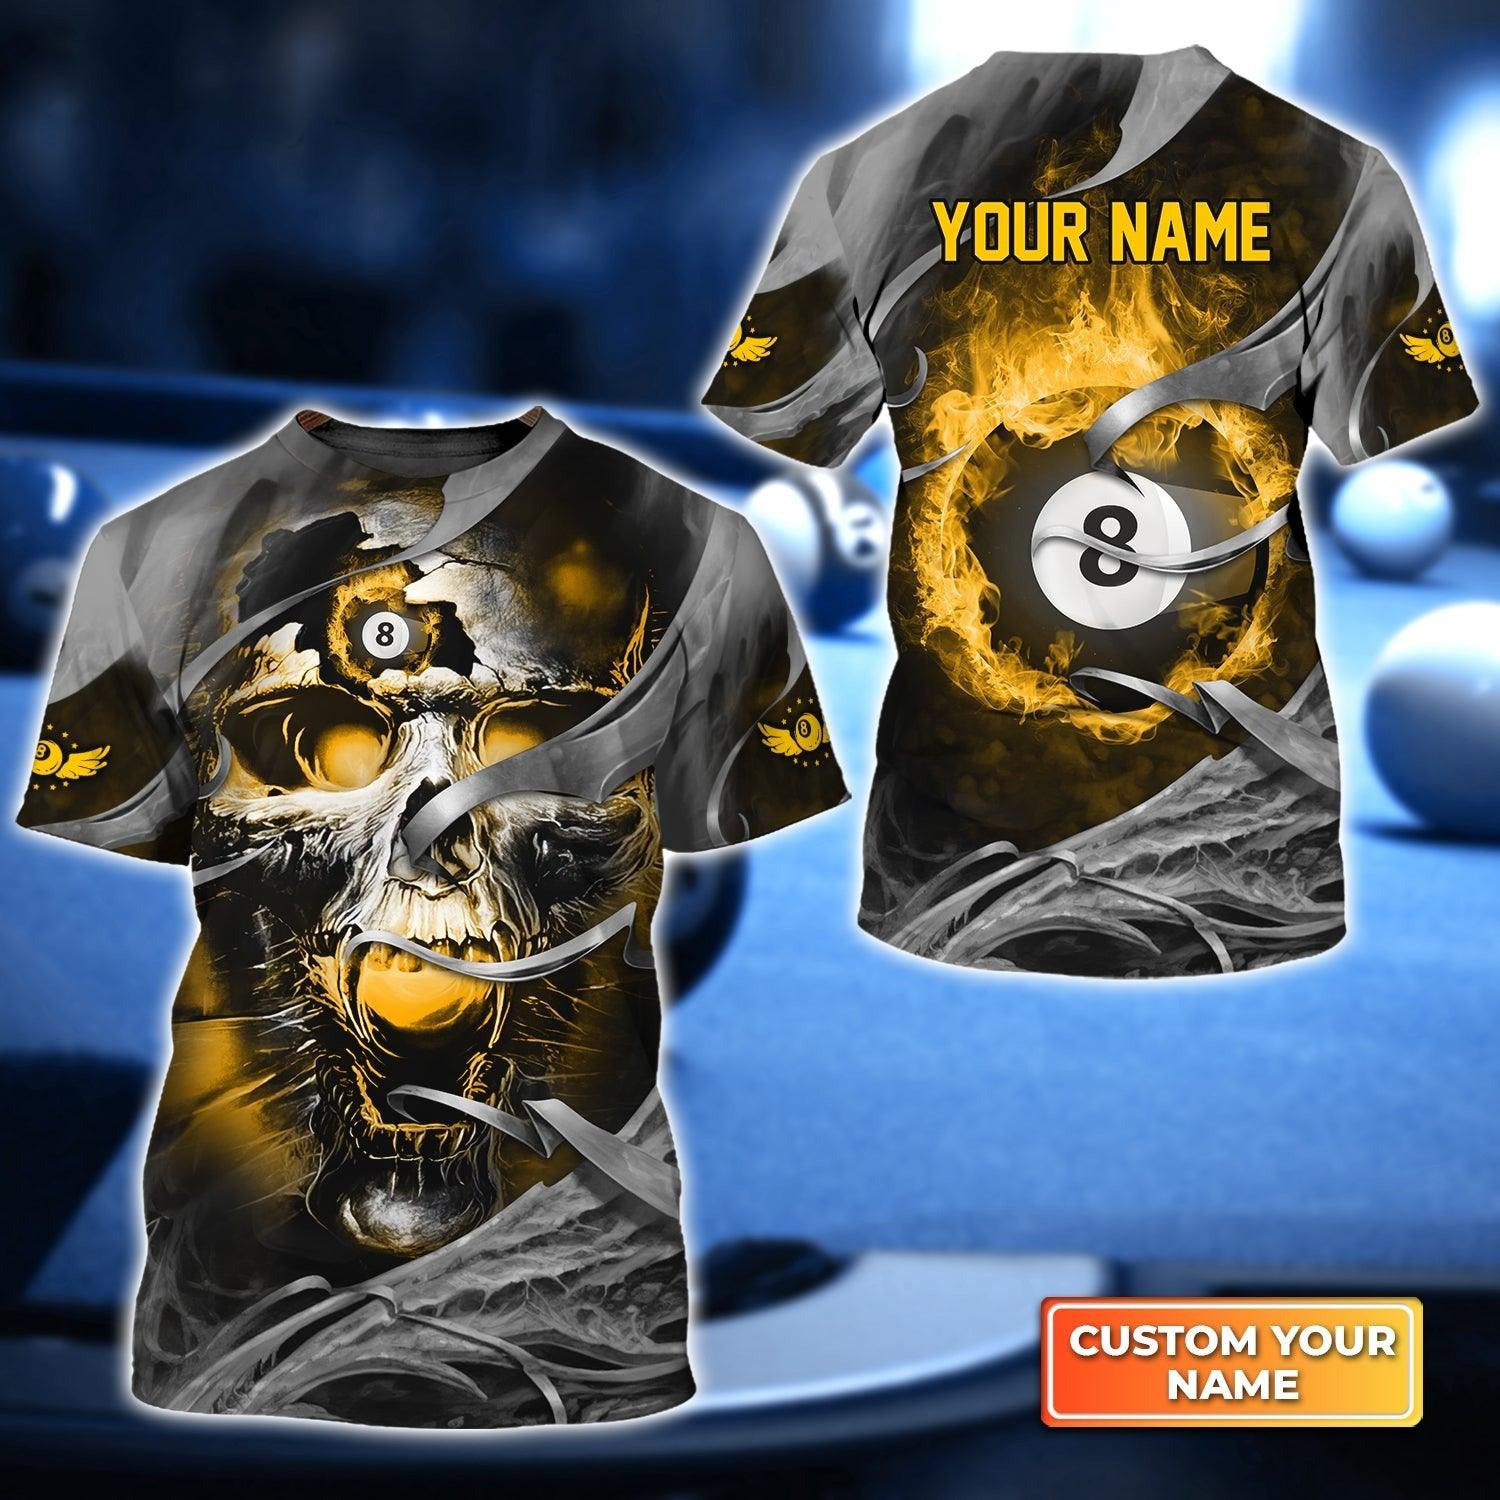 Customized Name Billiard T Shirt, Black And Yellow Fire Skull With 8-Ball Billiards Game T Shirt For Men - Gift For Billiard Lovers, Billiard Players - Amzanimalsgift